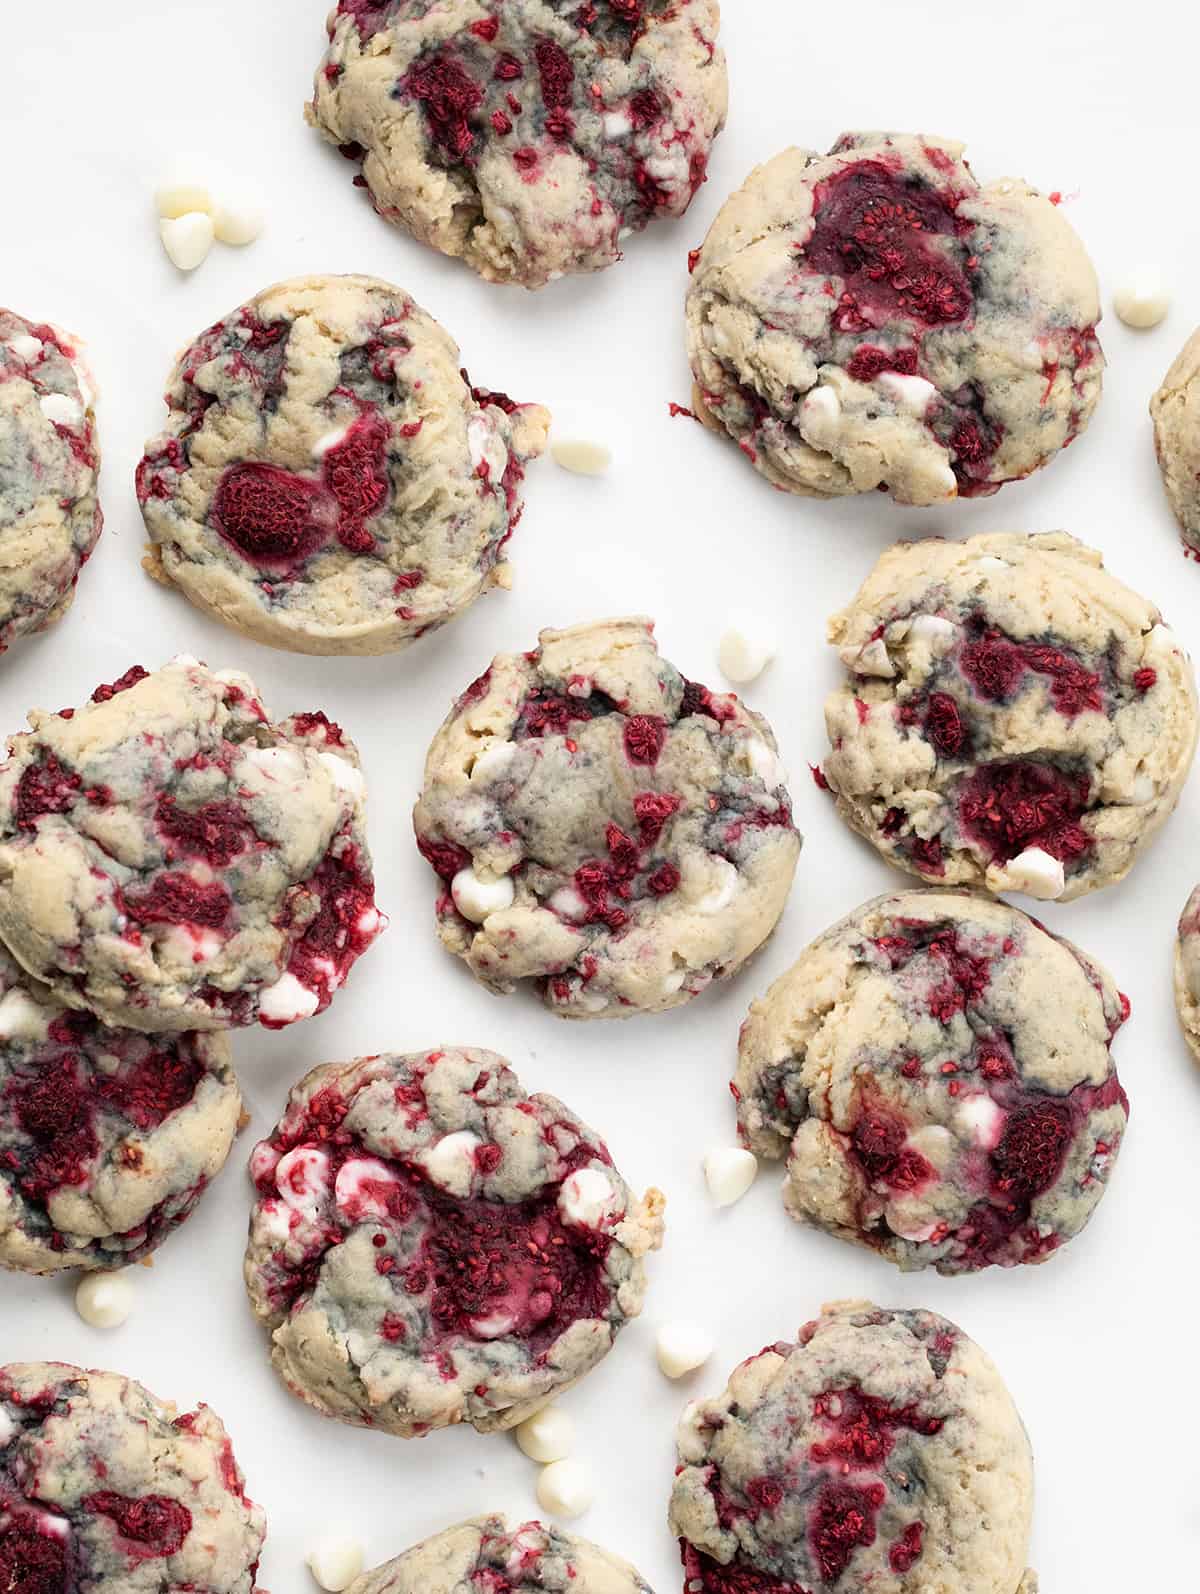 White Chocolate Raspberry Cookies on a white Table from overhead.